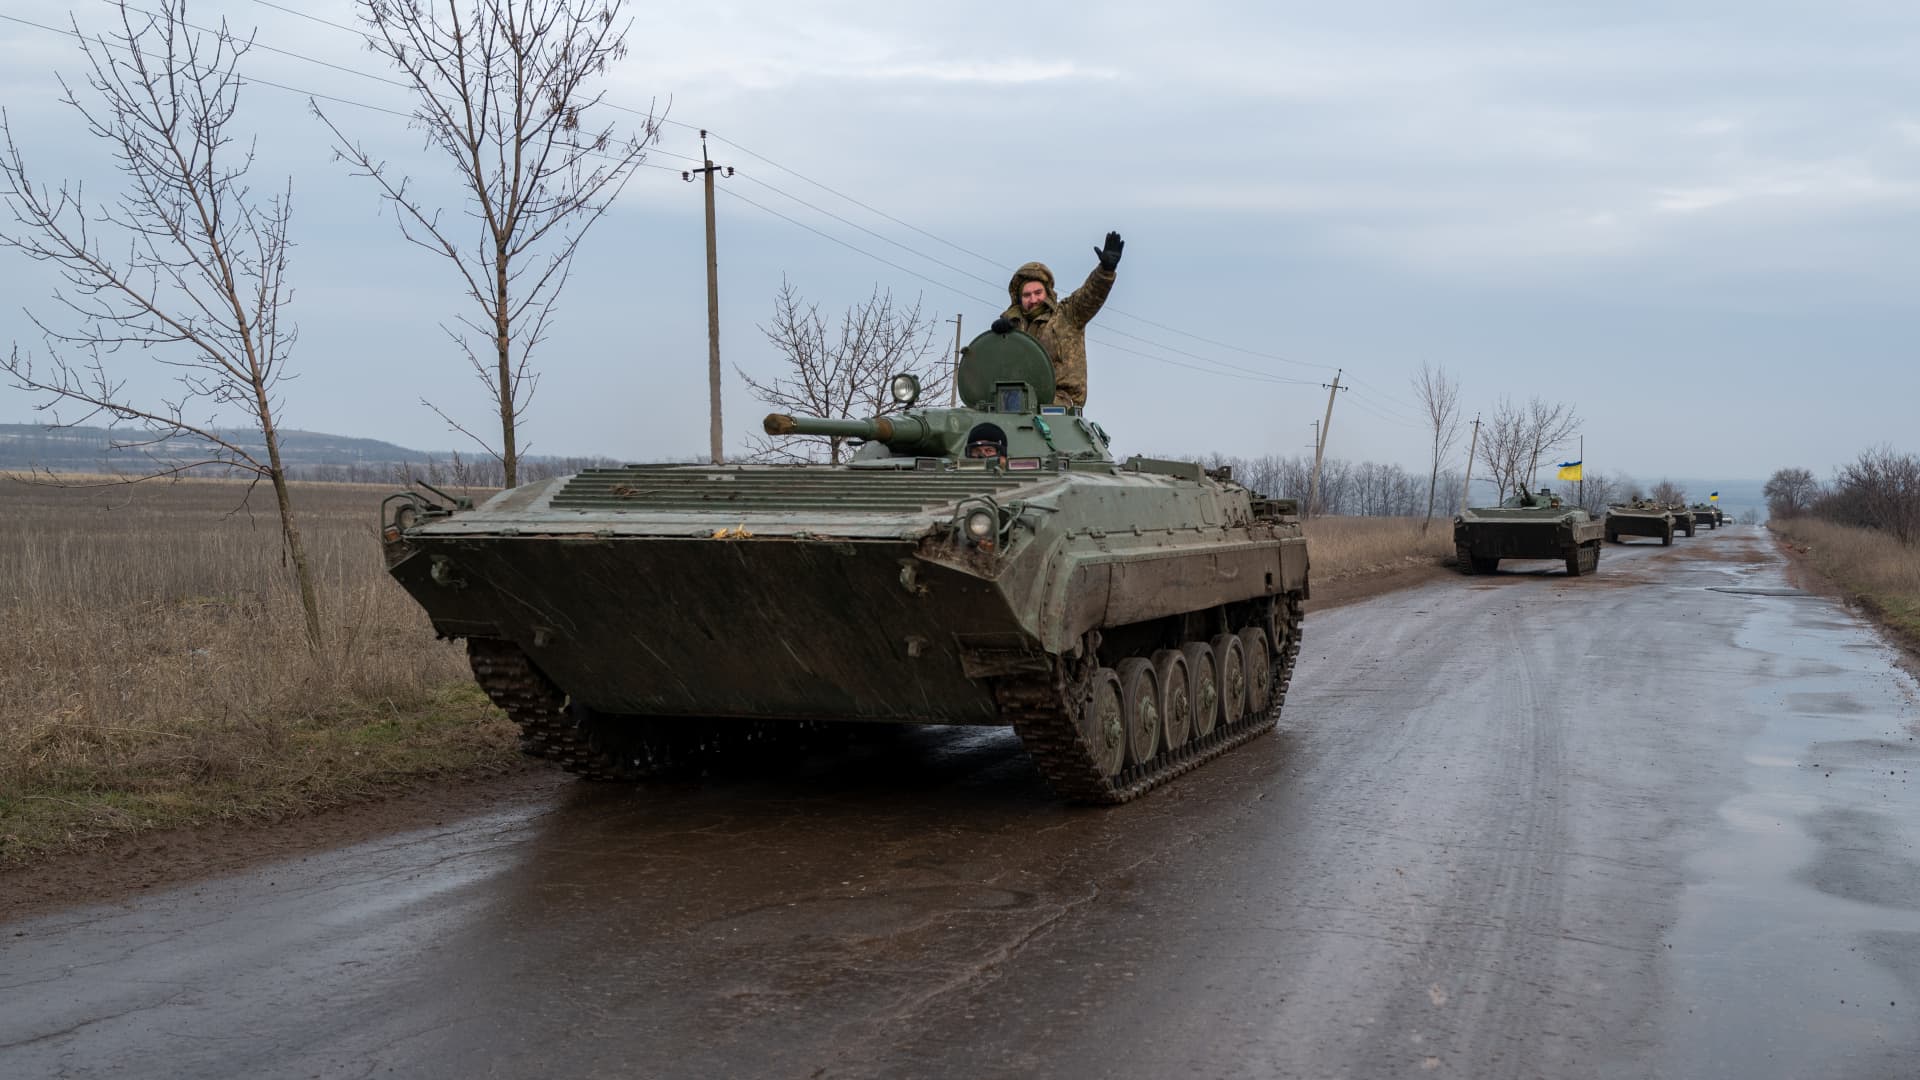 Allies provide extra weapons to Ukraine, however no selections have been made on tanks